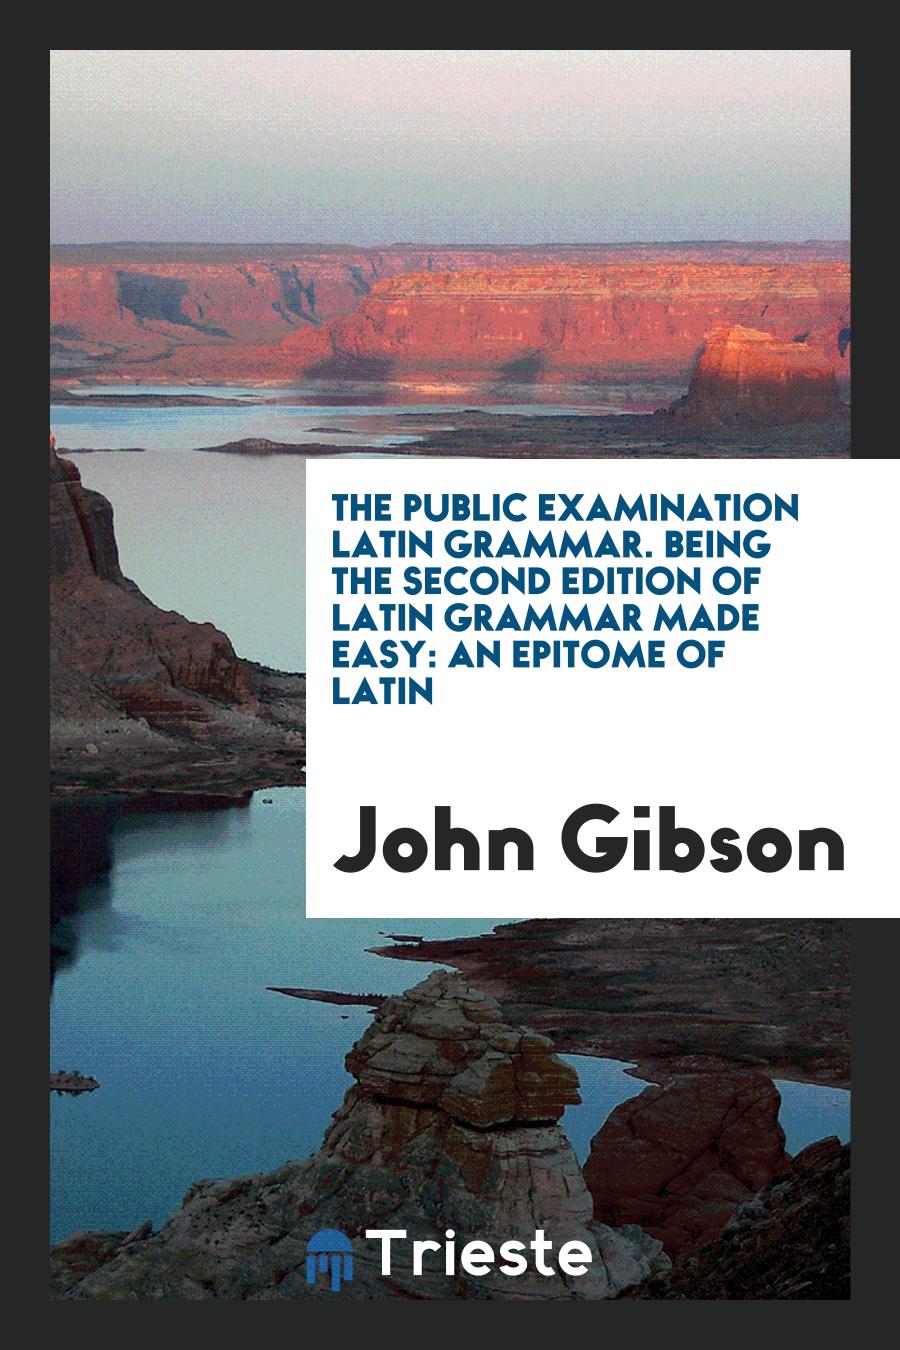 The public examination Latin grammar. Being the second edition of Latin grammar made easy: an epitome of Latin